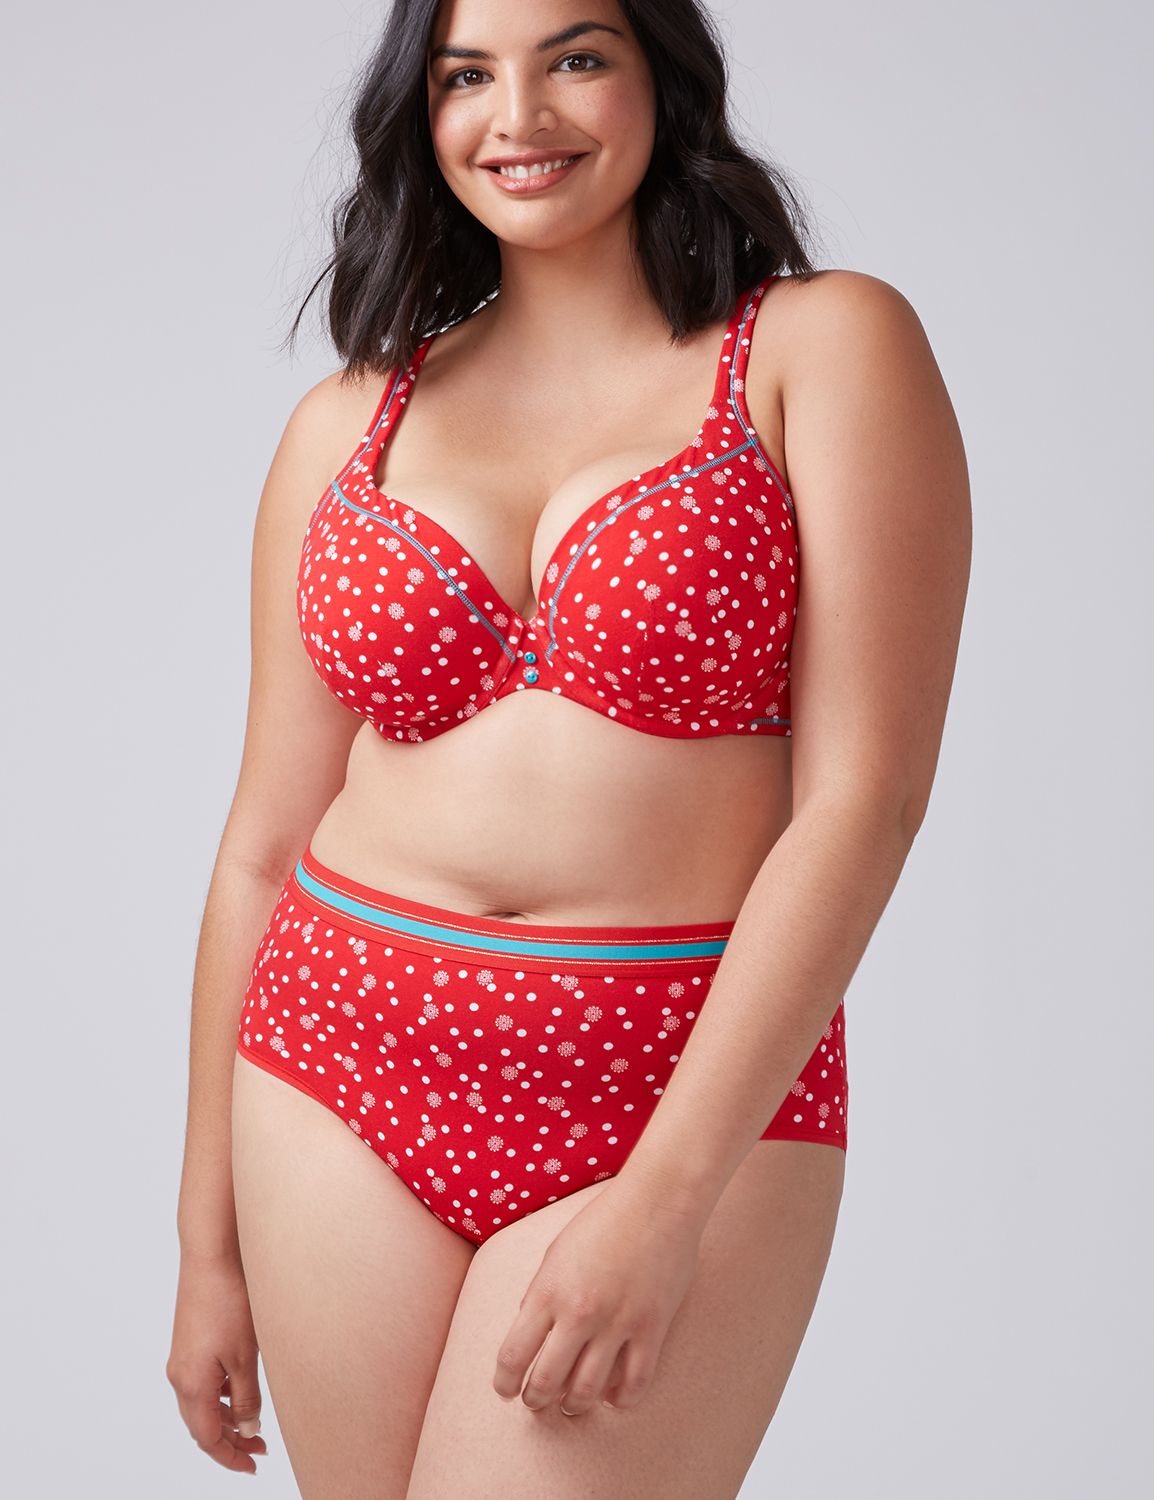 $5.99 Panties from Cacique | Plus Size Underwear | Lane Bryant